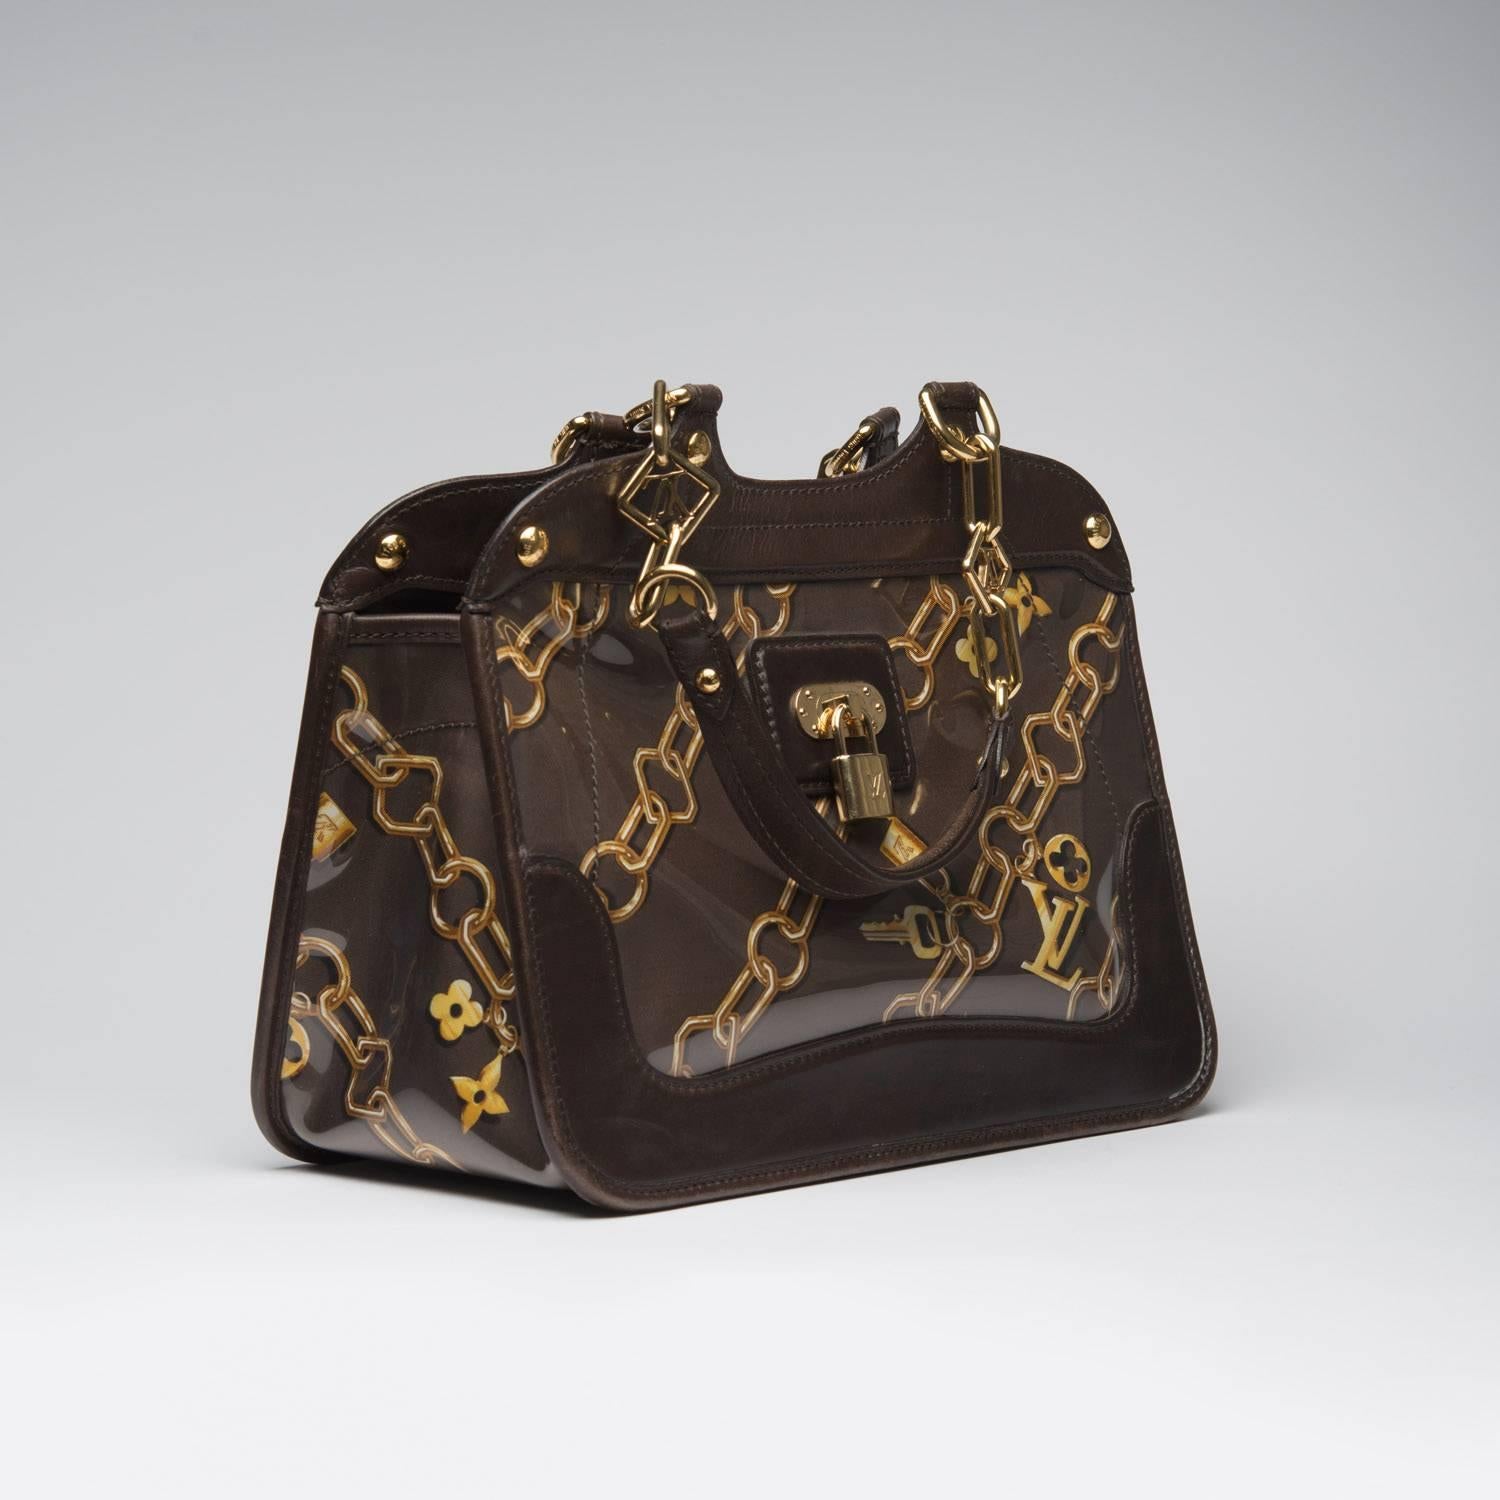 2006 Limited Edition Louis Vuitton By Marc Jacobs Bag 
Shoulder bag leather silk and vinyl  more picture on request 